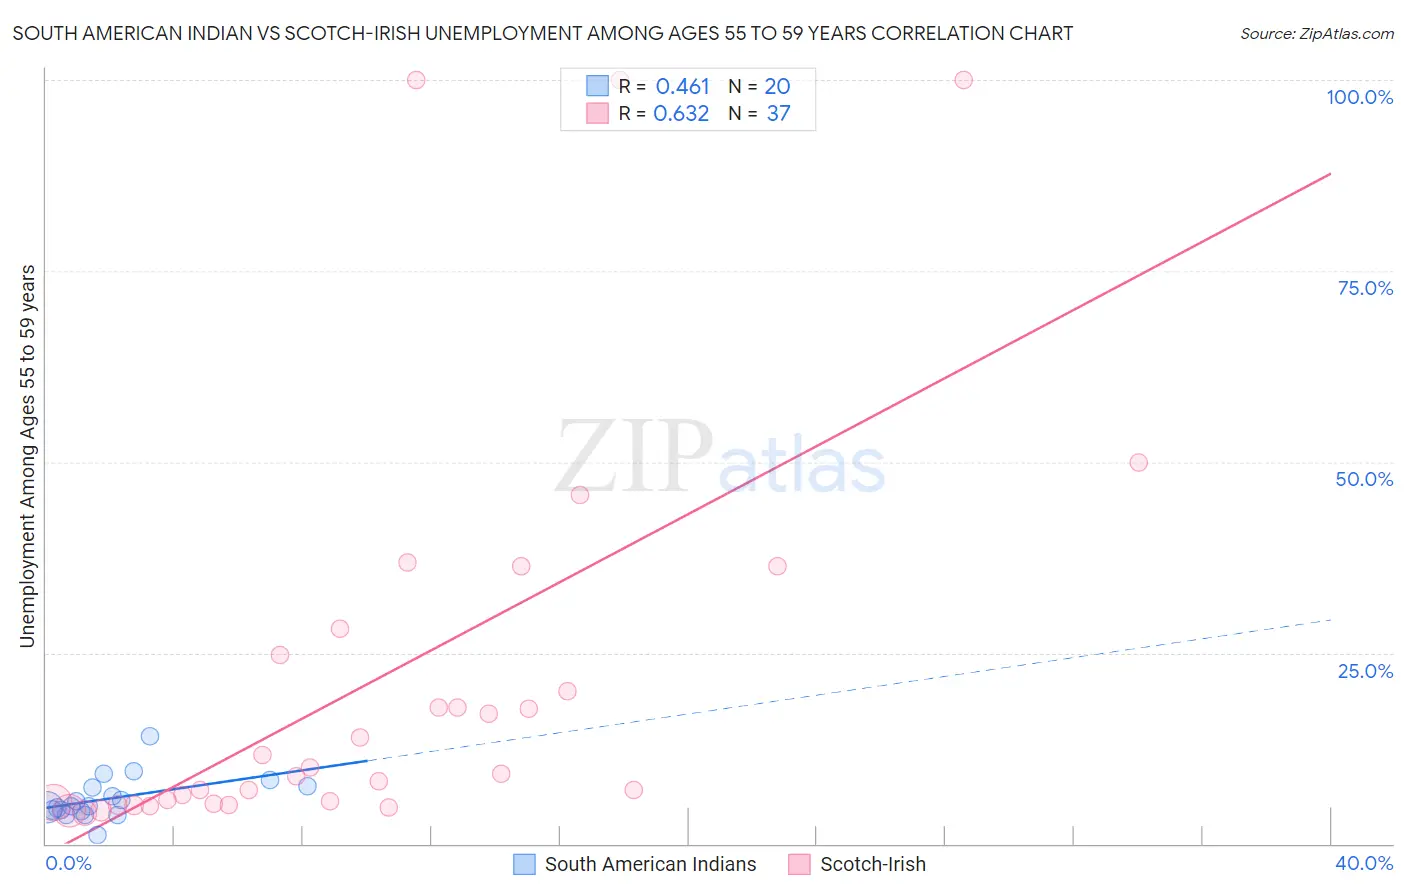 South American Indian vs Scotch-Irish Unemployment Among Ages 55 to 59 years